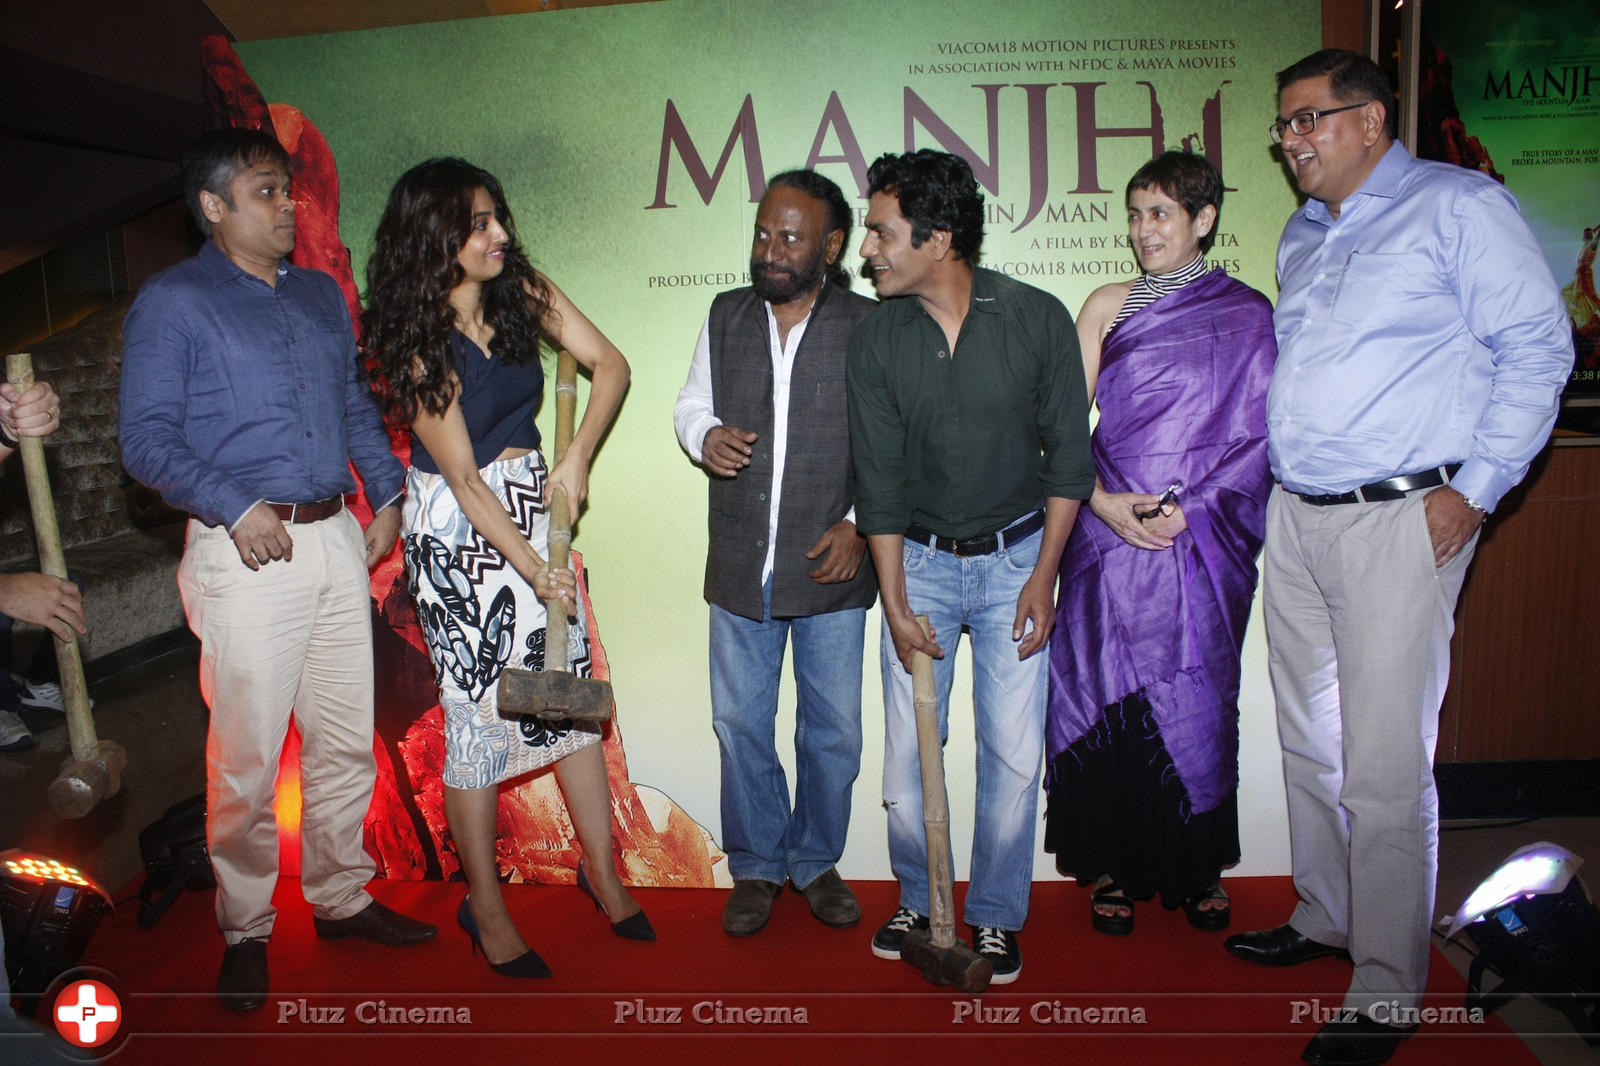 Trailer launch of film Manjhi The Mountain Man Photos | Picture 1061973